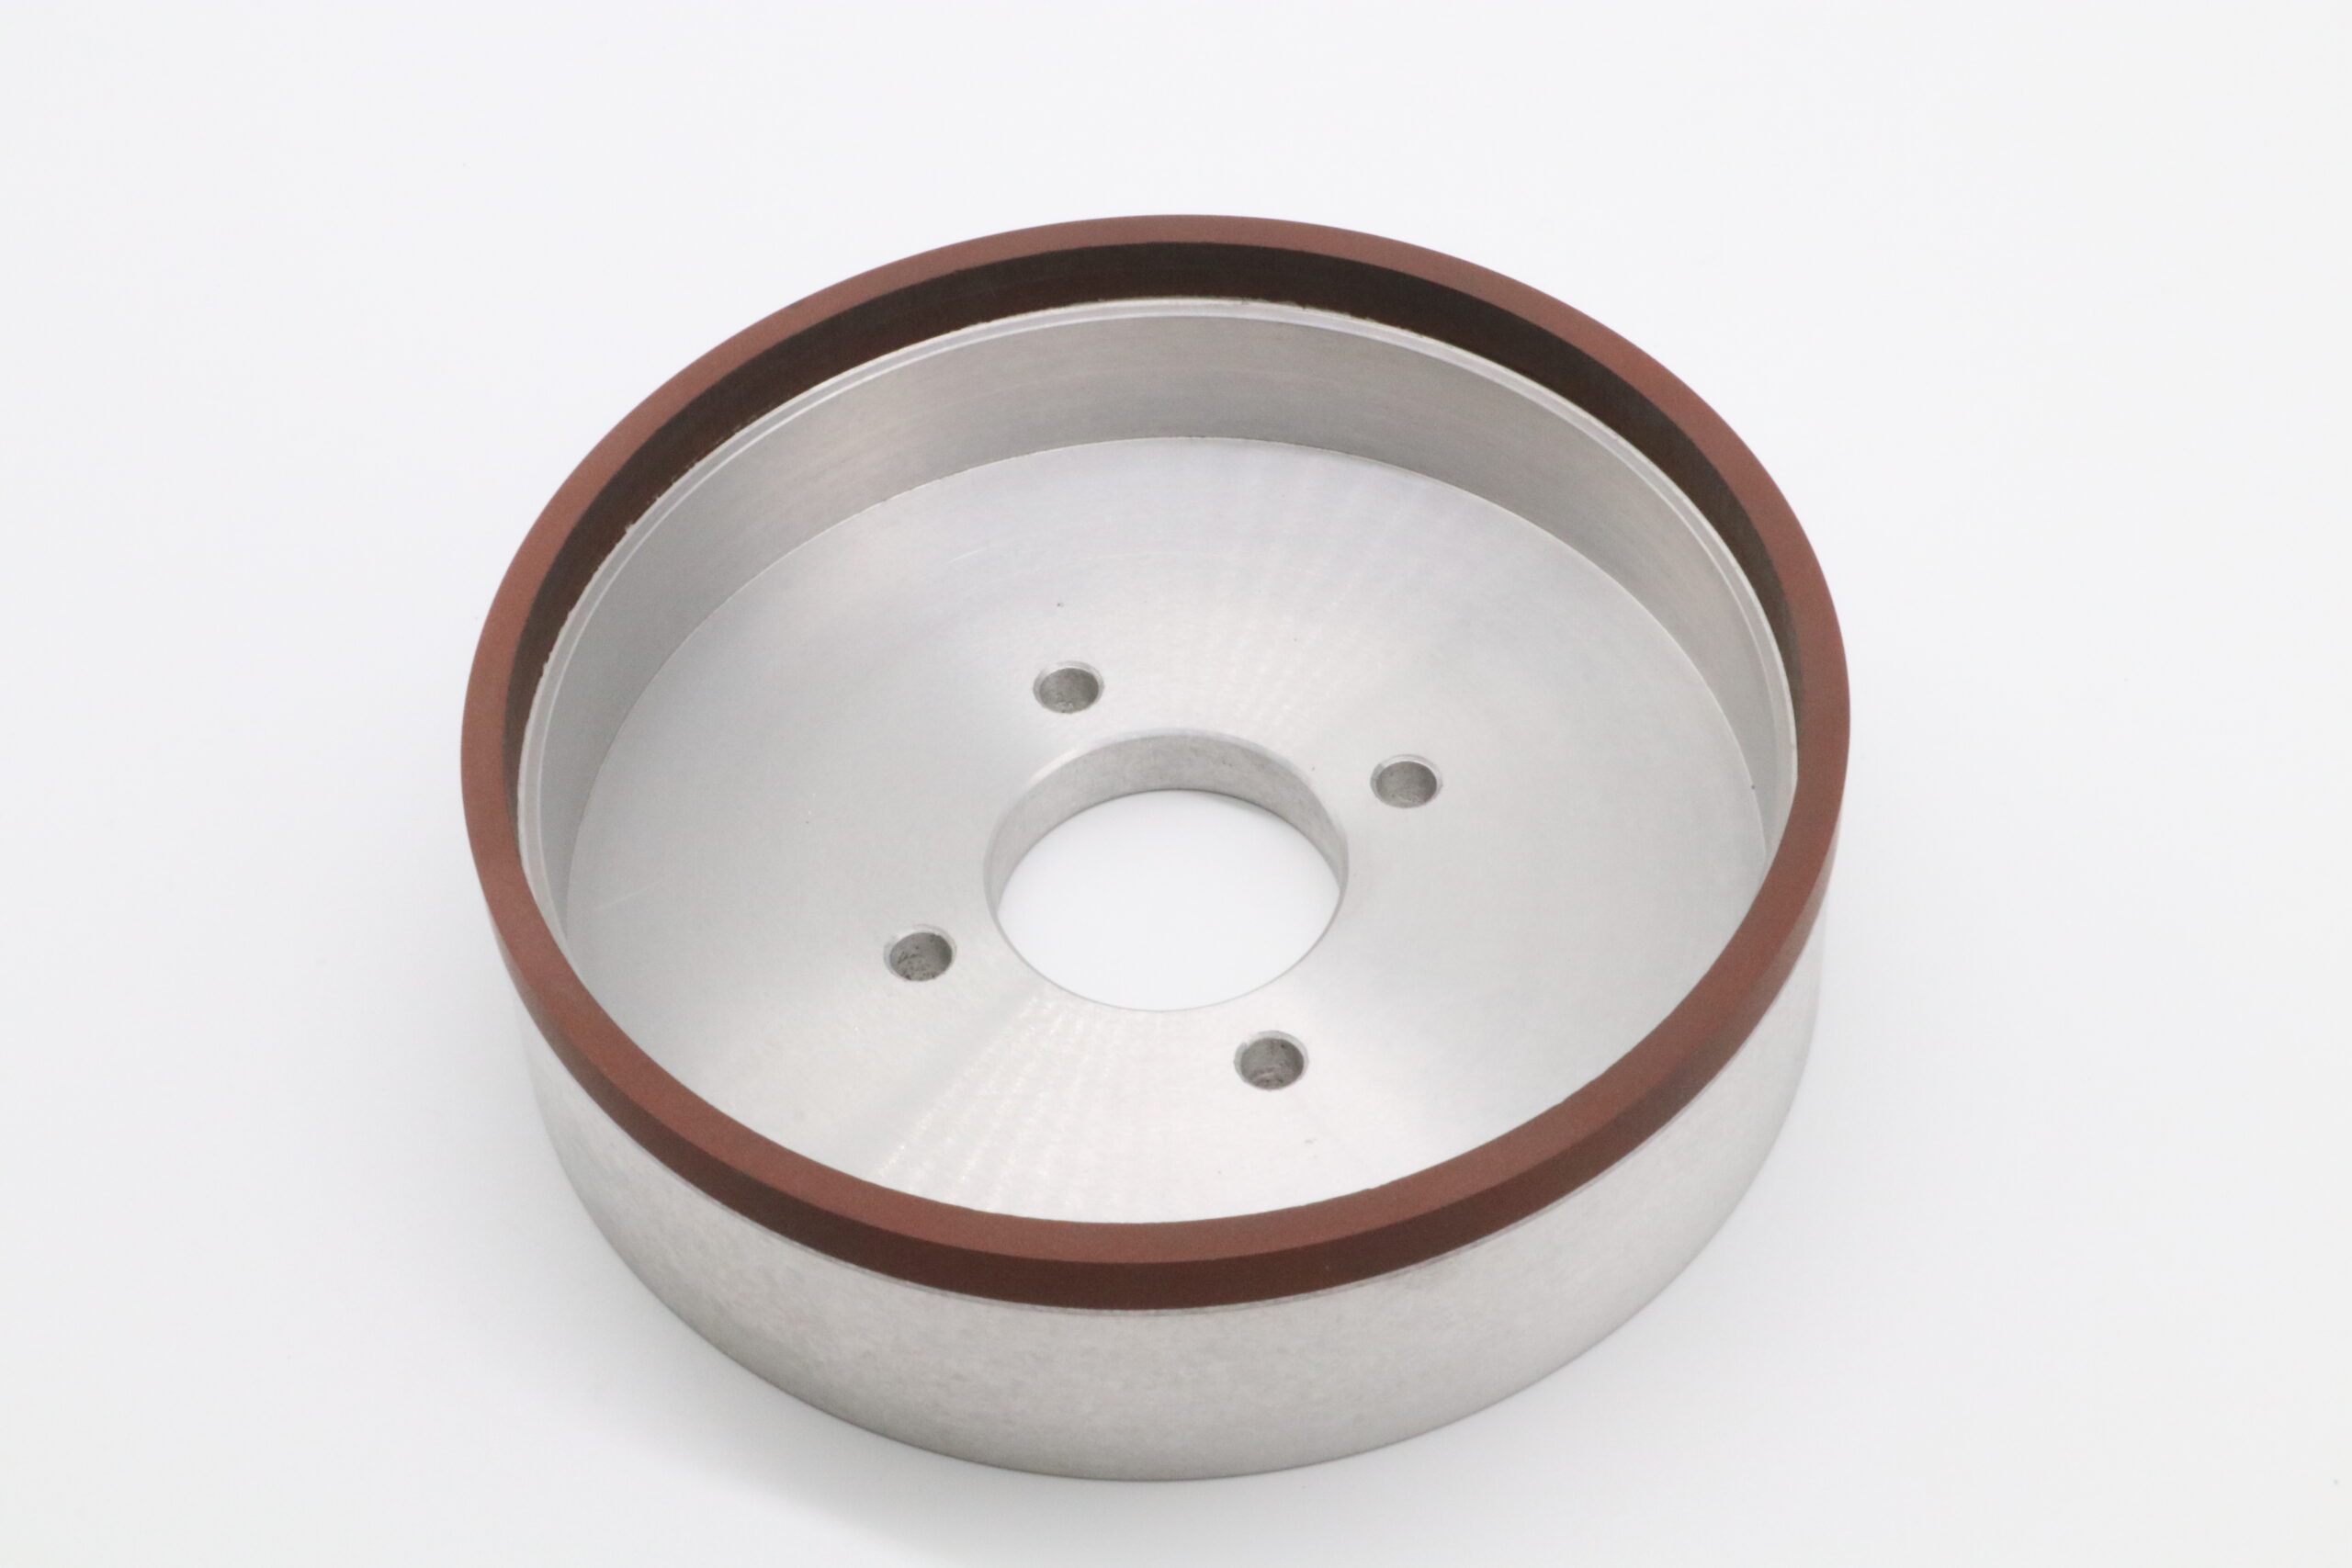 CBN Grinding Wheel Suppliers for the Grinding Diamond Wheels of Tungsten Carbide